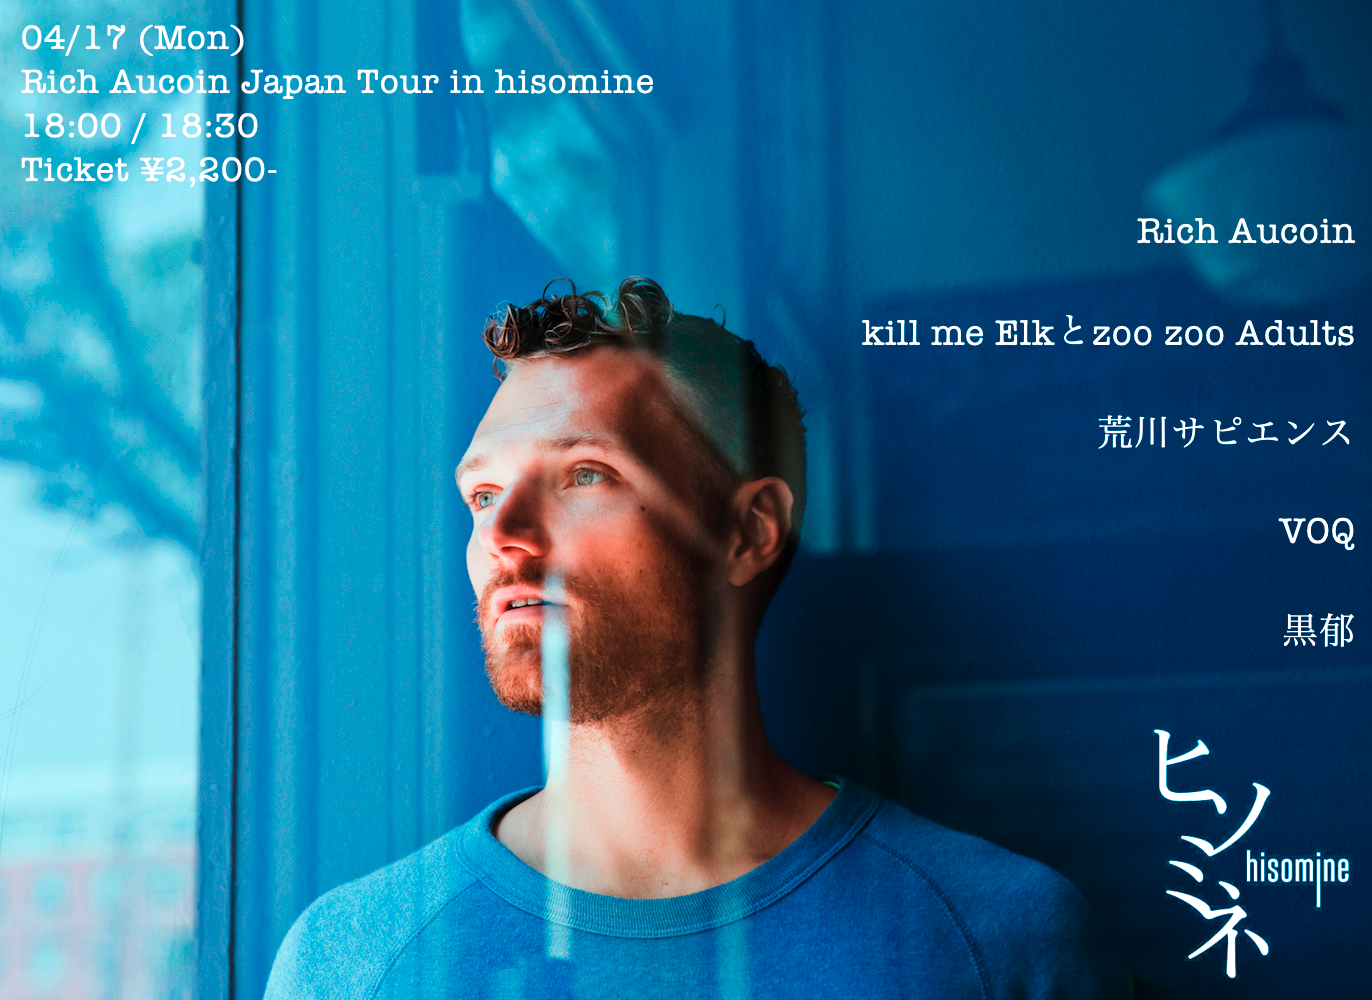 Rich Aucoin  Japan Tour in hisomine